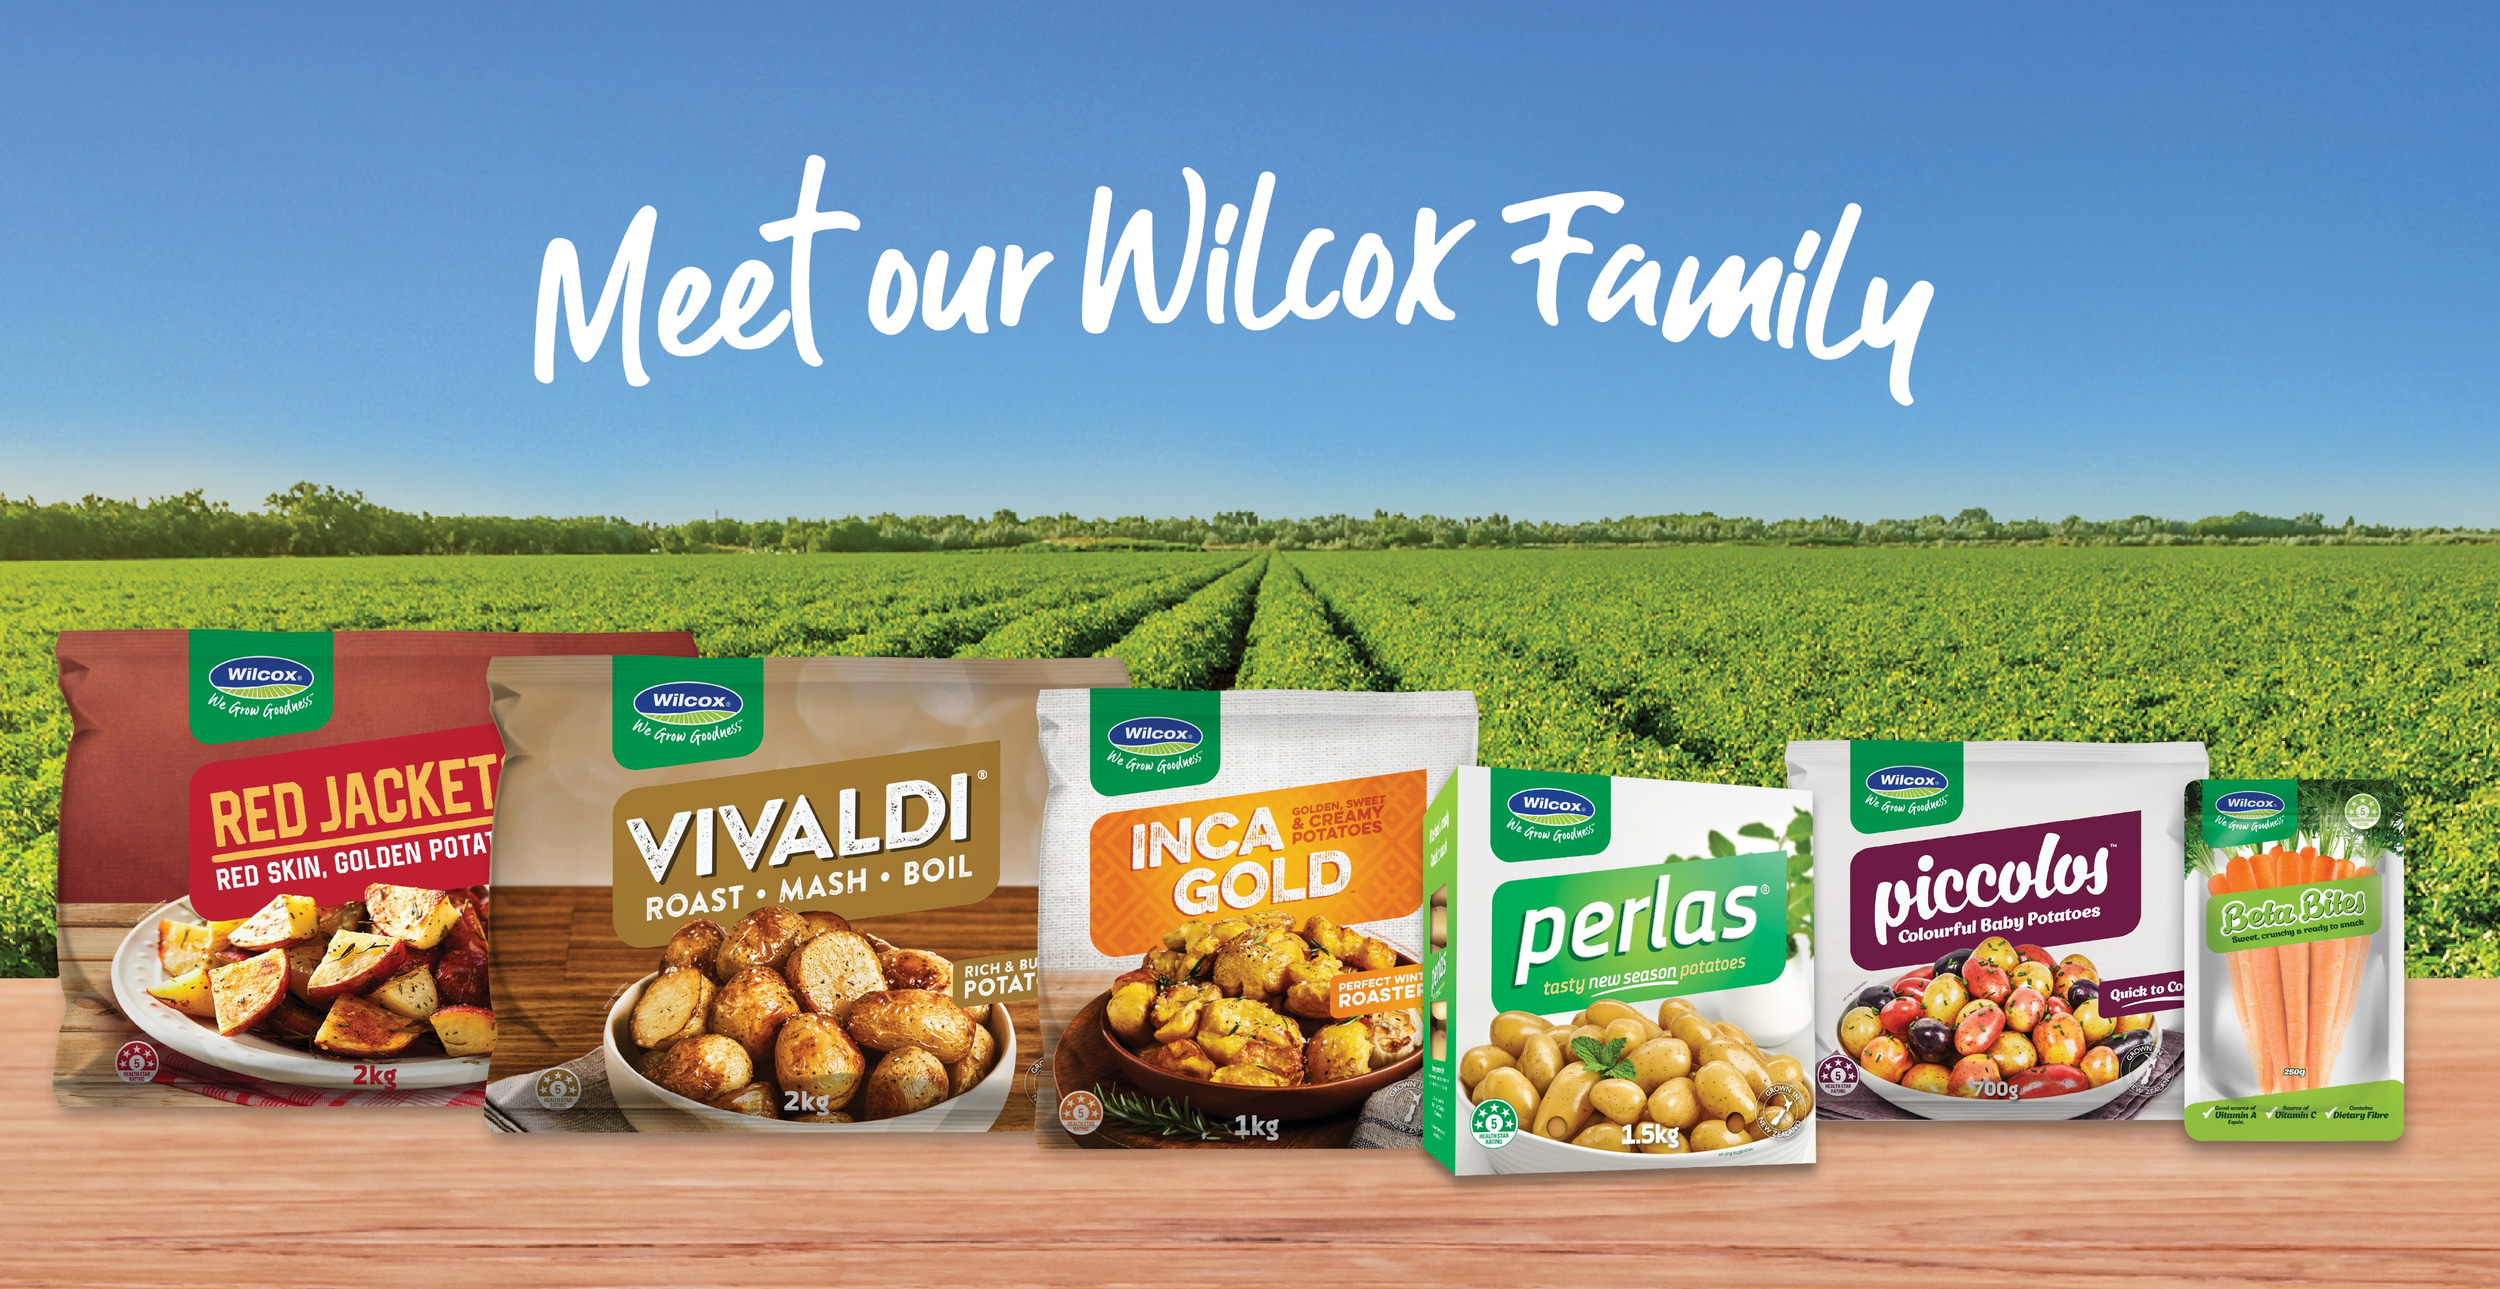 Meet our Wilcox Family